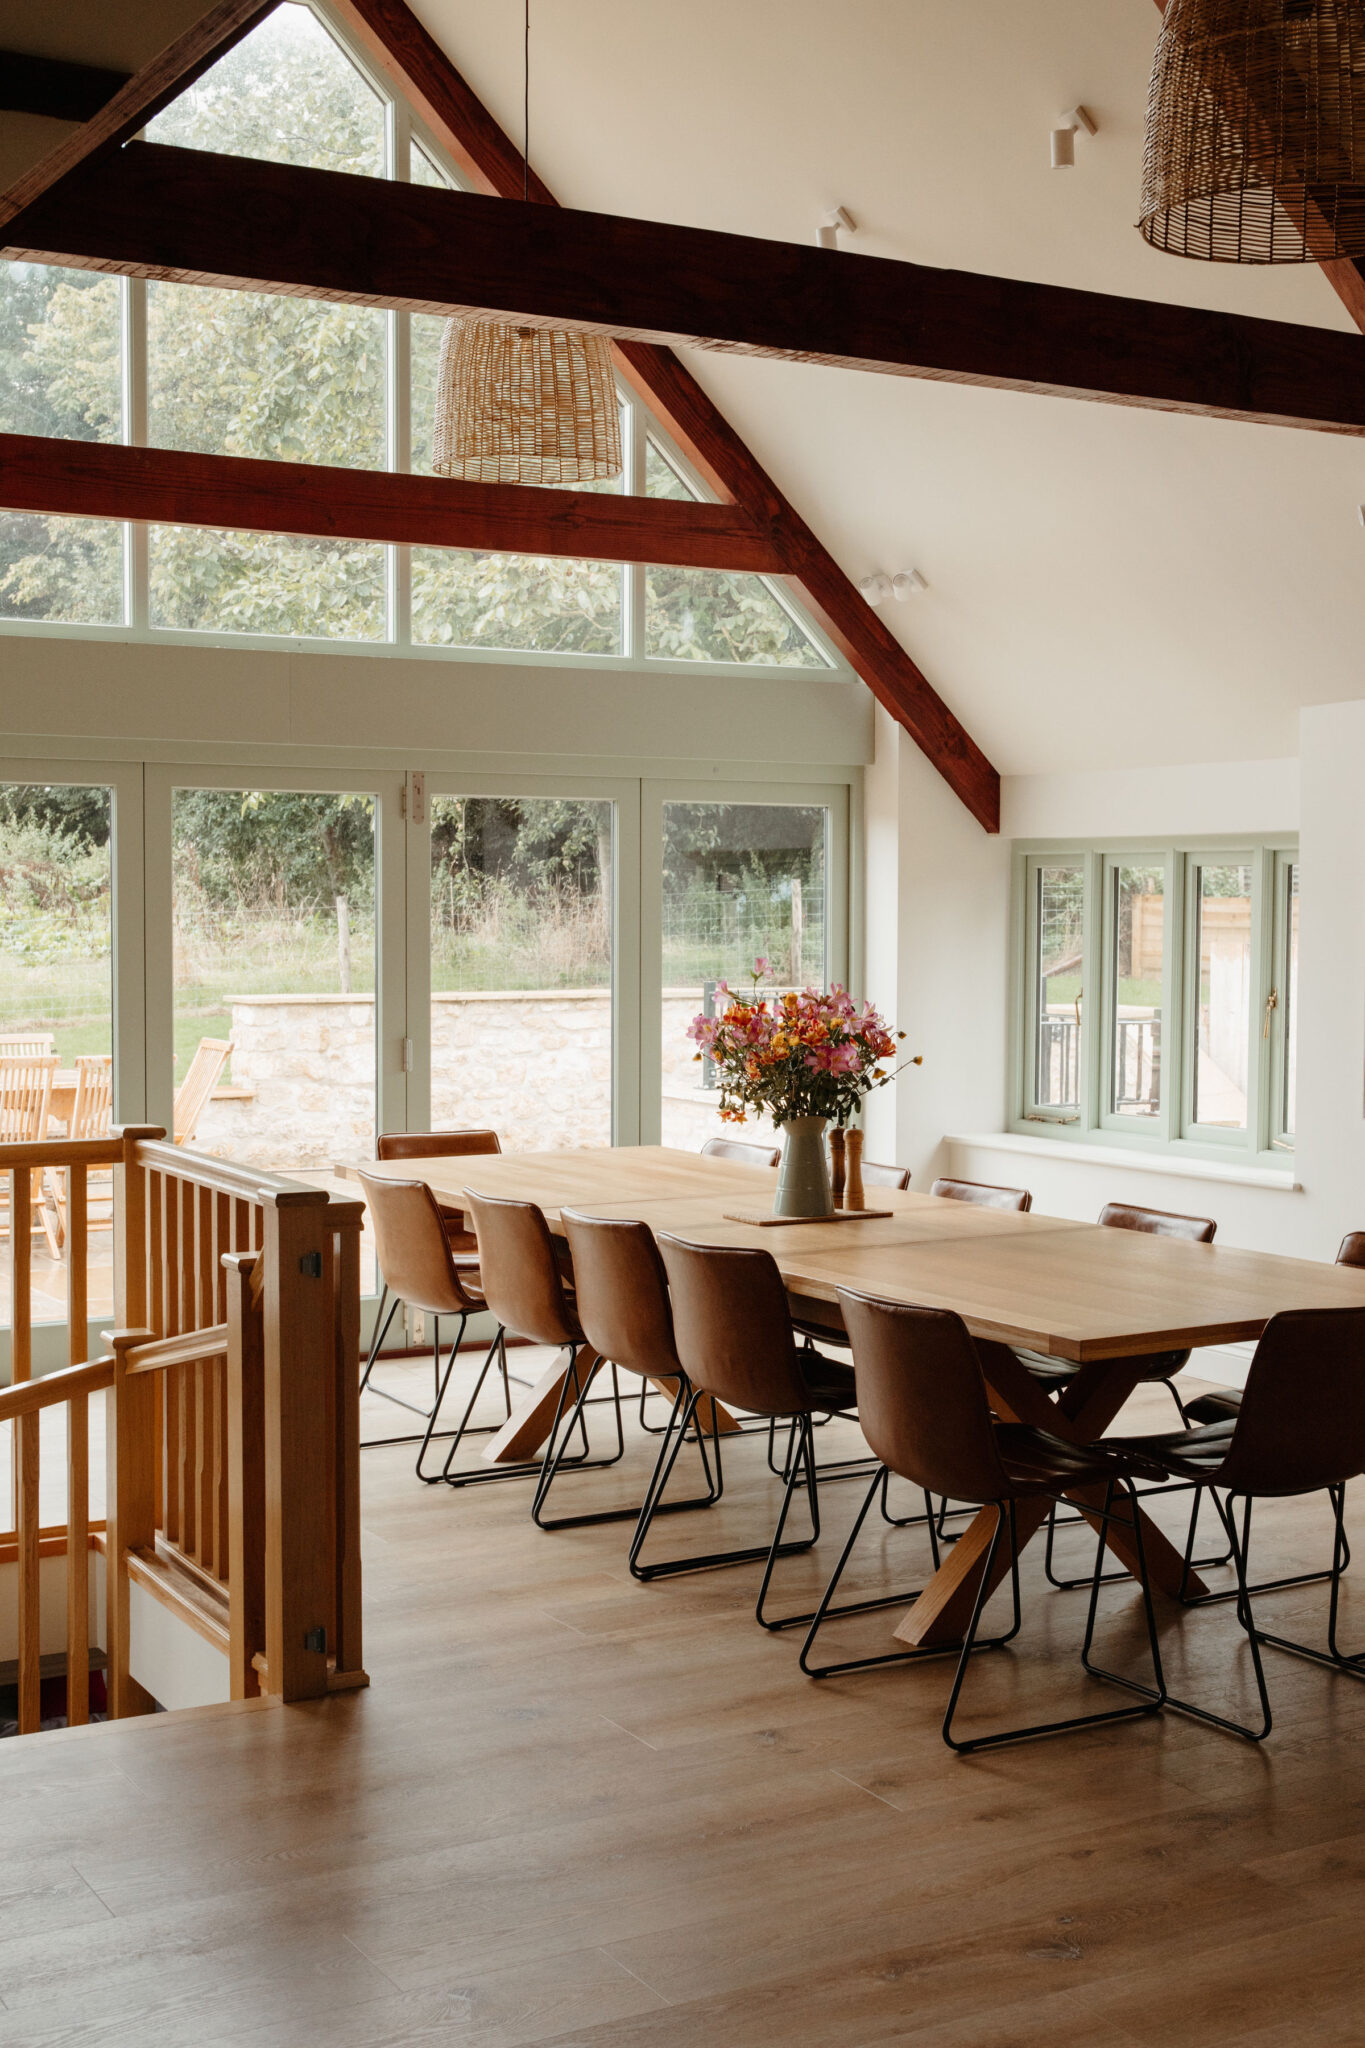 Long wooden dining table with leather chairs in large room with high ceilings and wooden beams